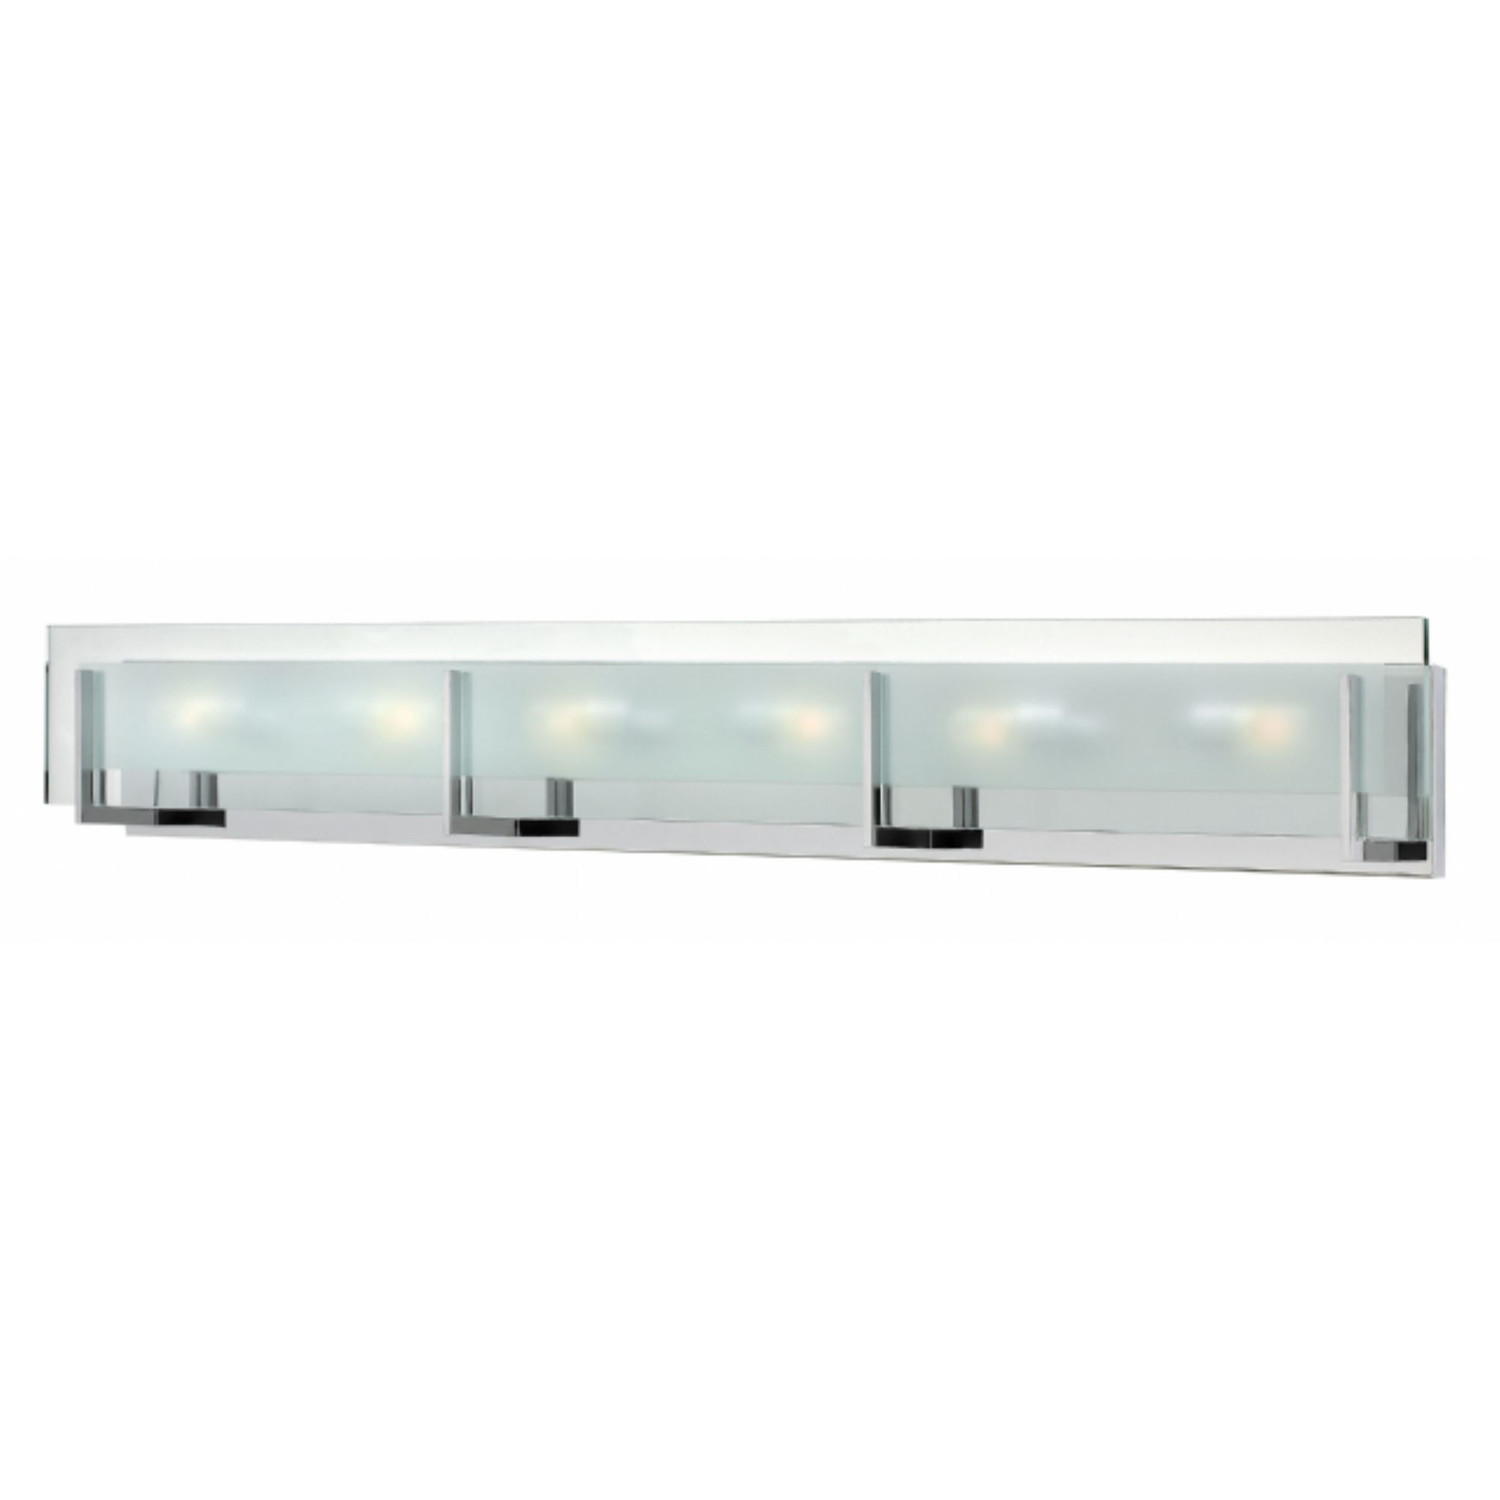 6 Bulb Bathroom Light Fixture
 Fill Your Bathroom Vanity with Dramatic Lights by